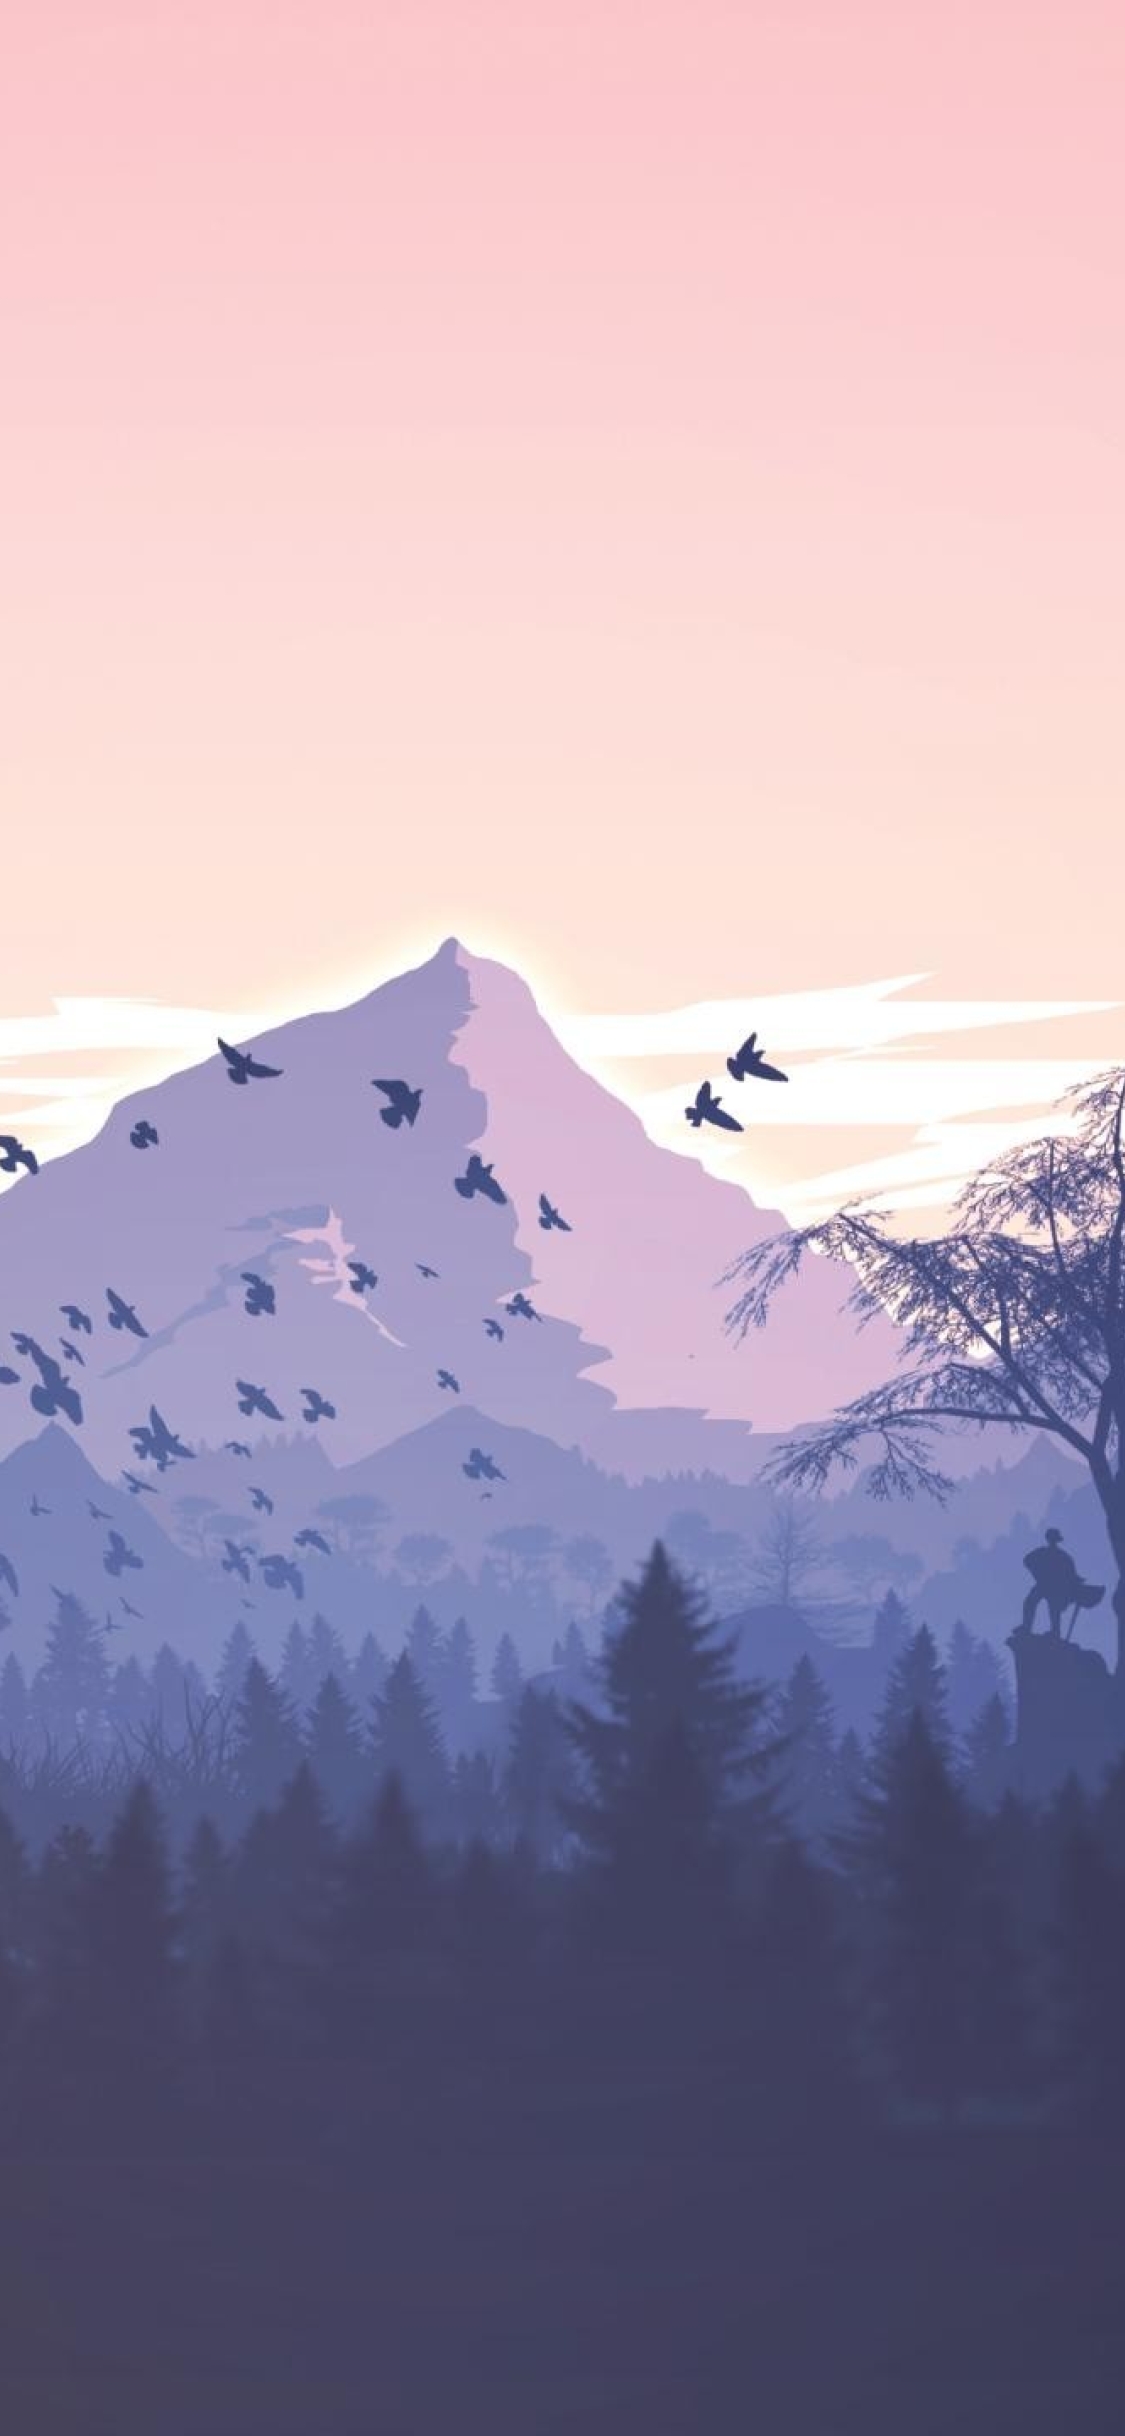 1125x2436 Resolution Forest And Mountains Illustrations Iphone Xs